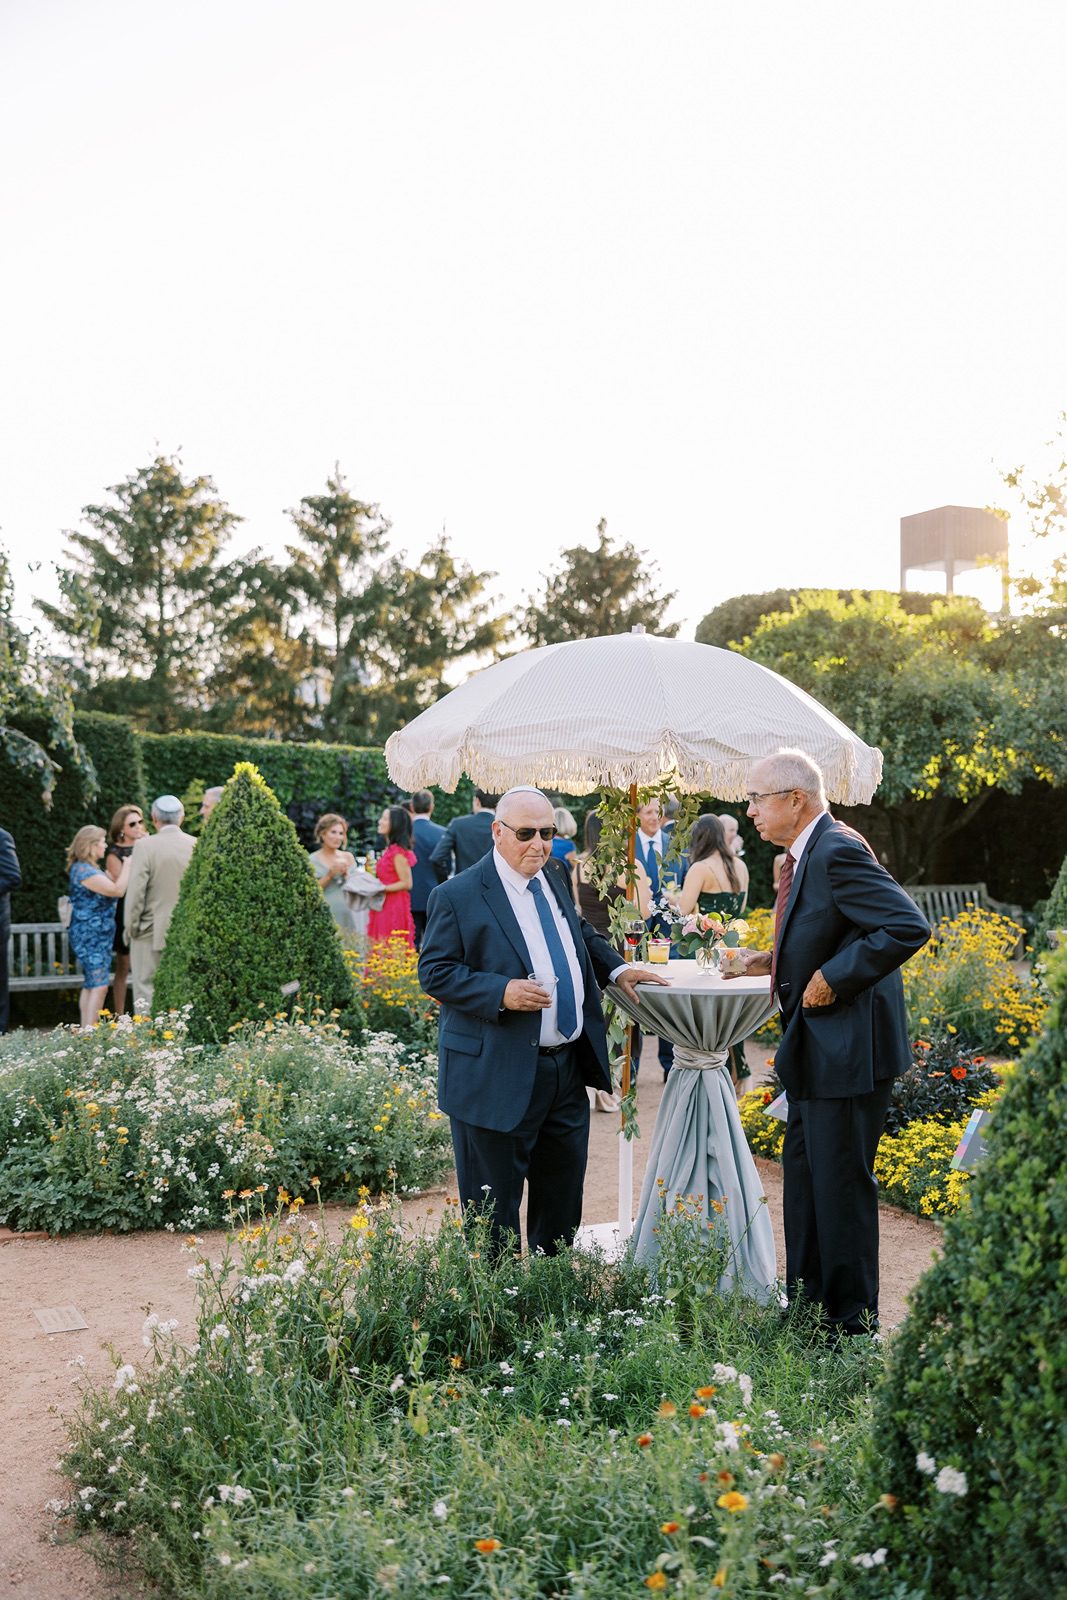 Guests enjoying outdoor cocktail hour at the Chicago Botanic Garden wedding